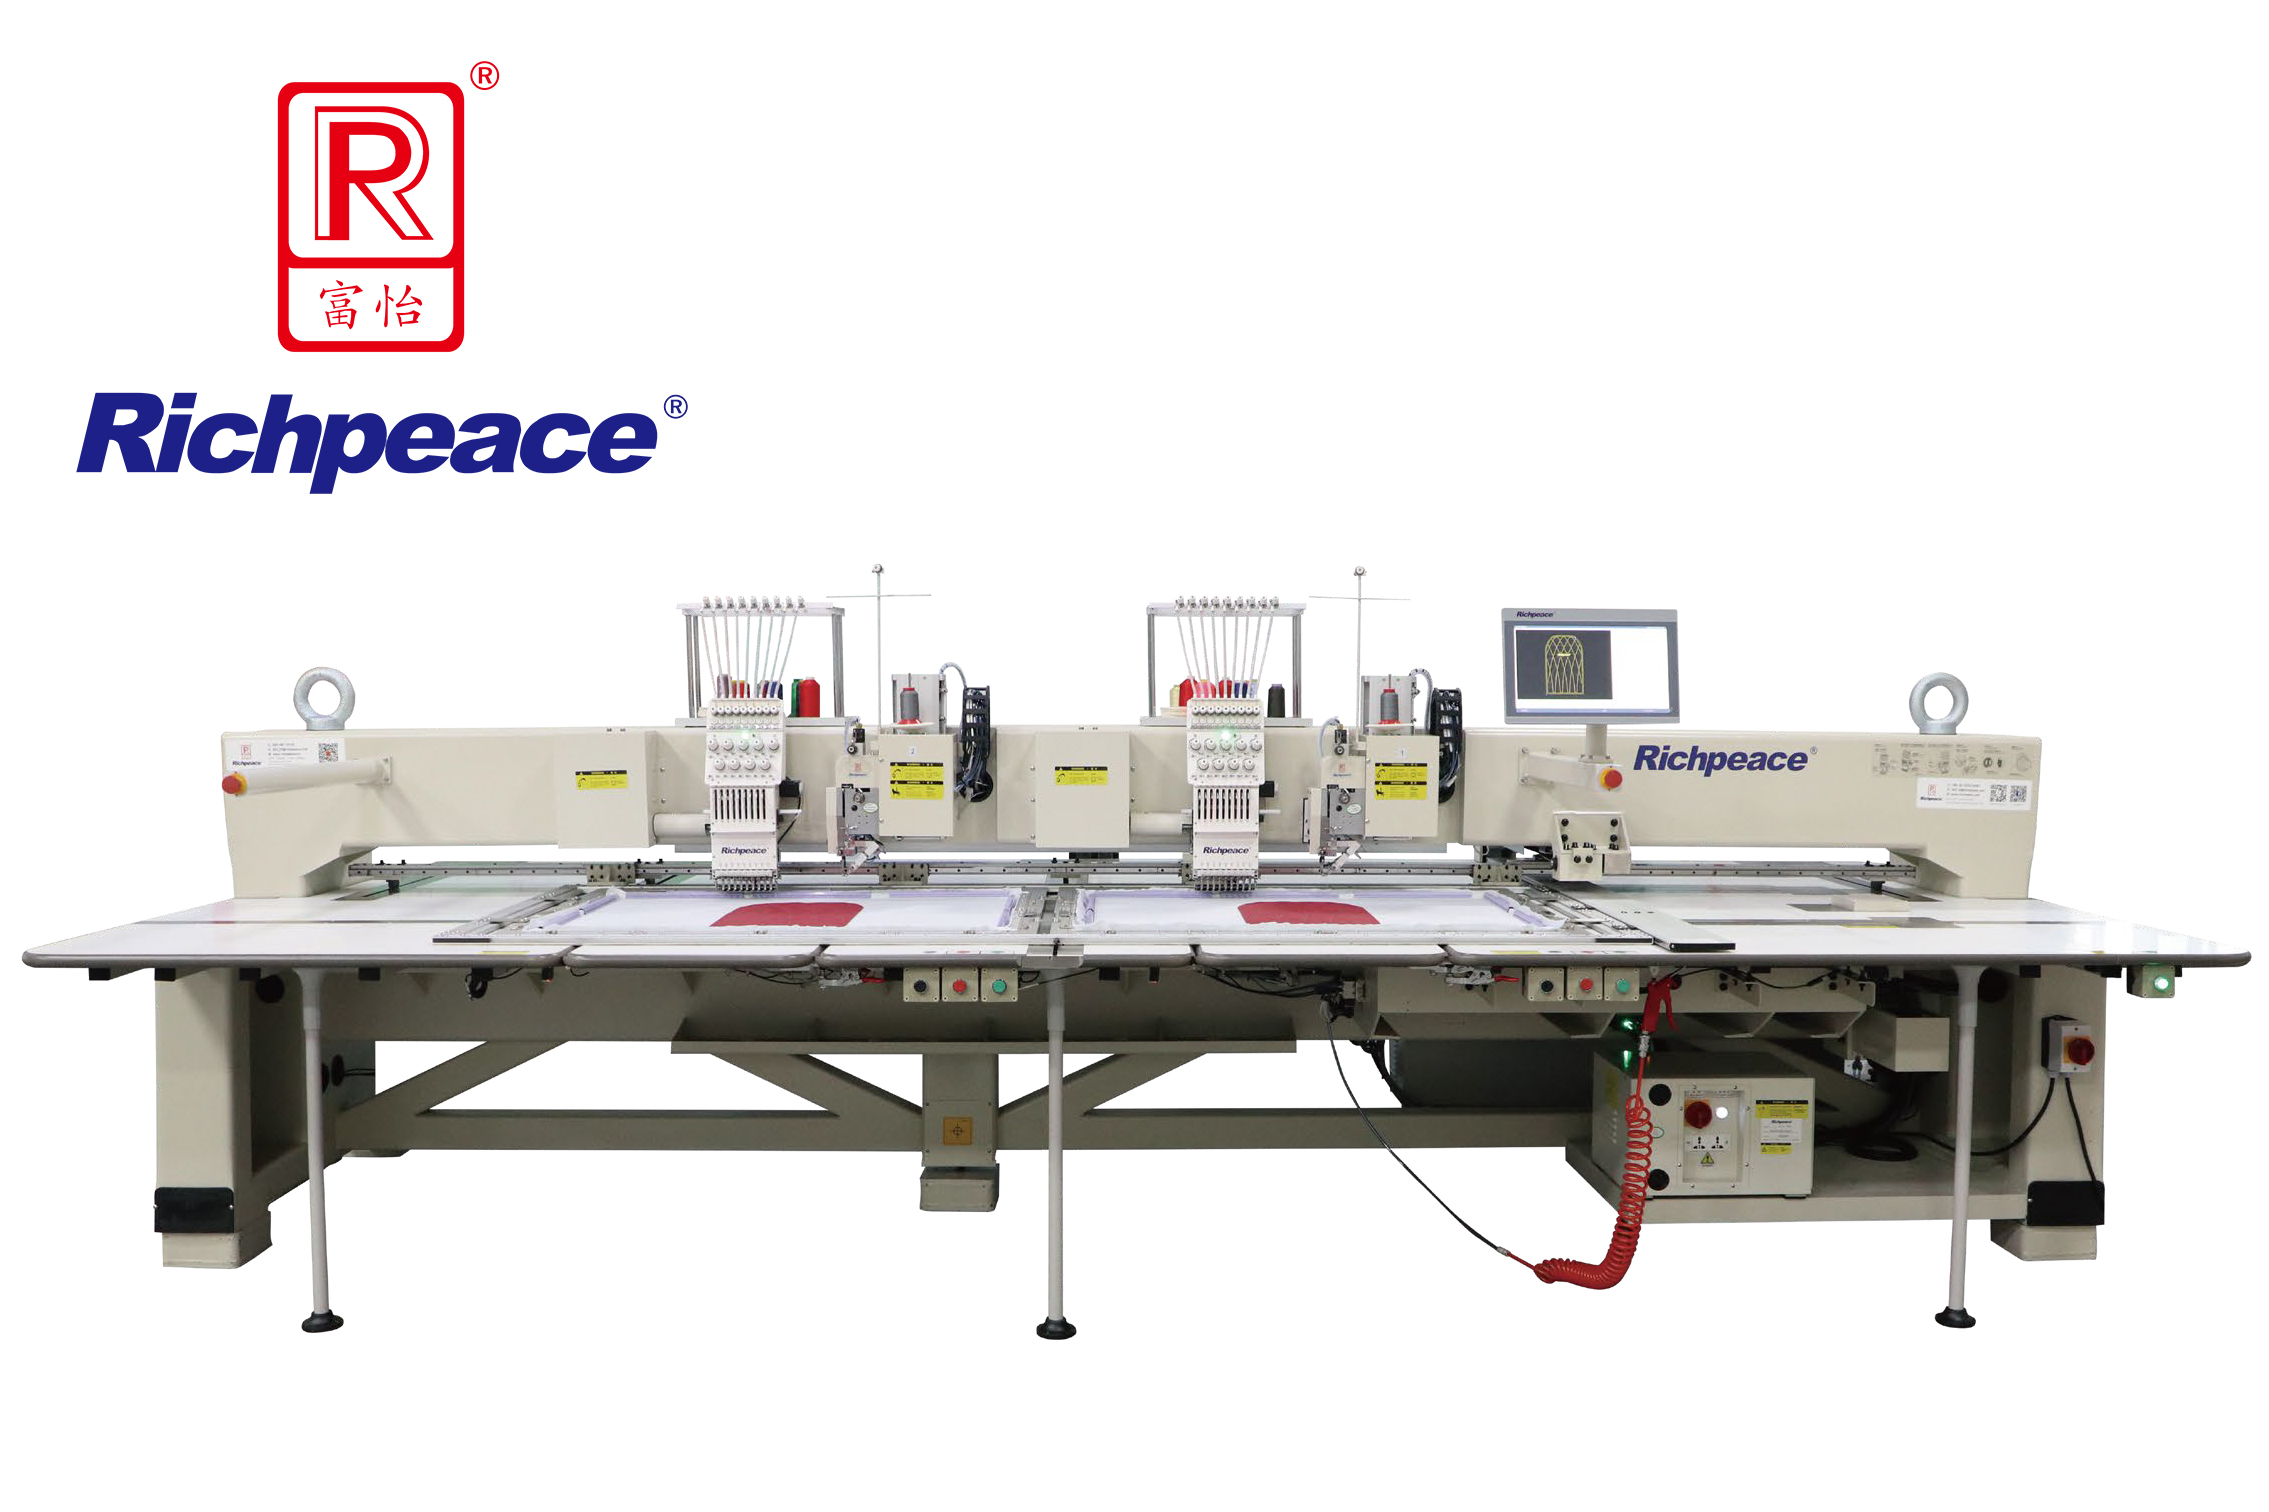 Richpeace Automatic Sewing+Embroidery Machine(9-color embroidery + Sewing)